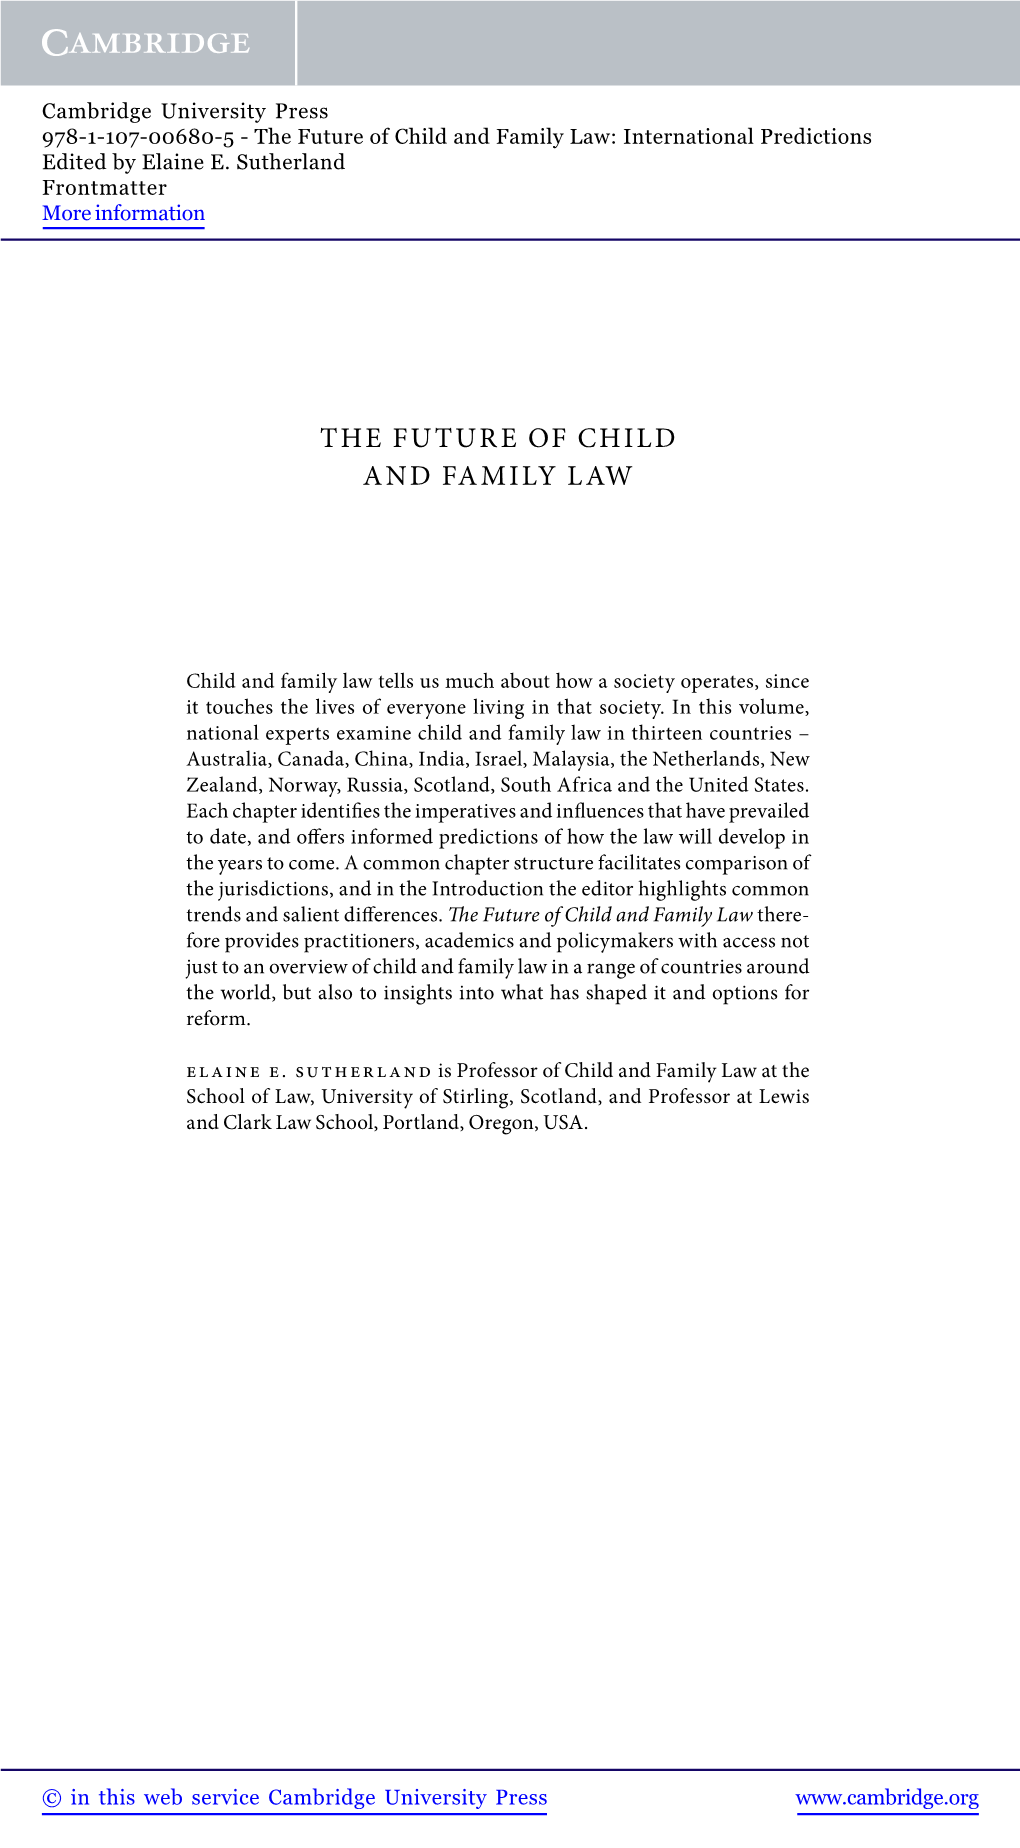 The Future of Child and Family Law: International Predictions Edited by Elaine E